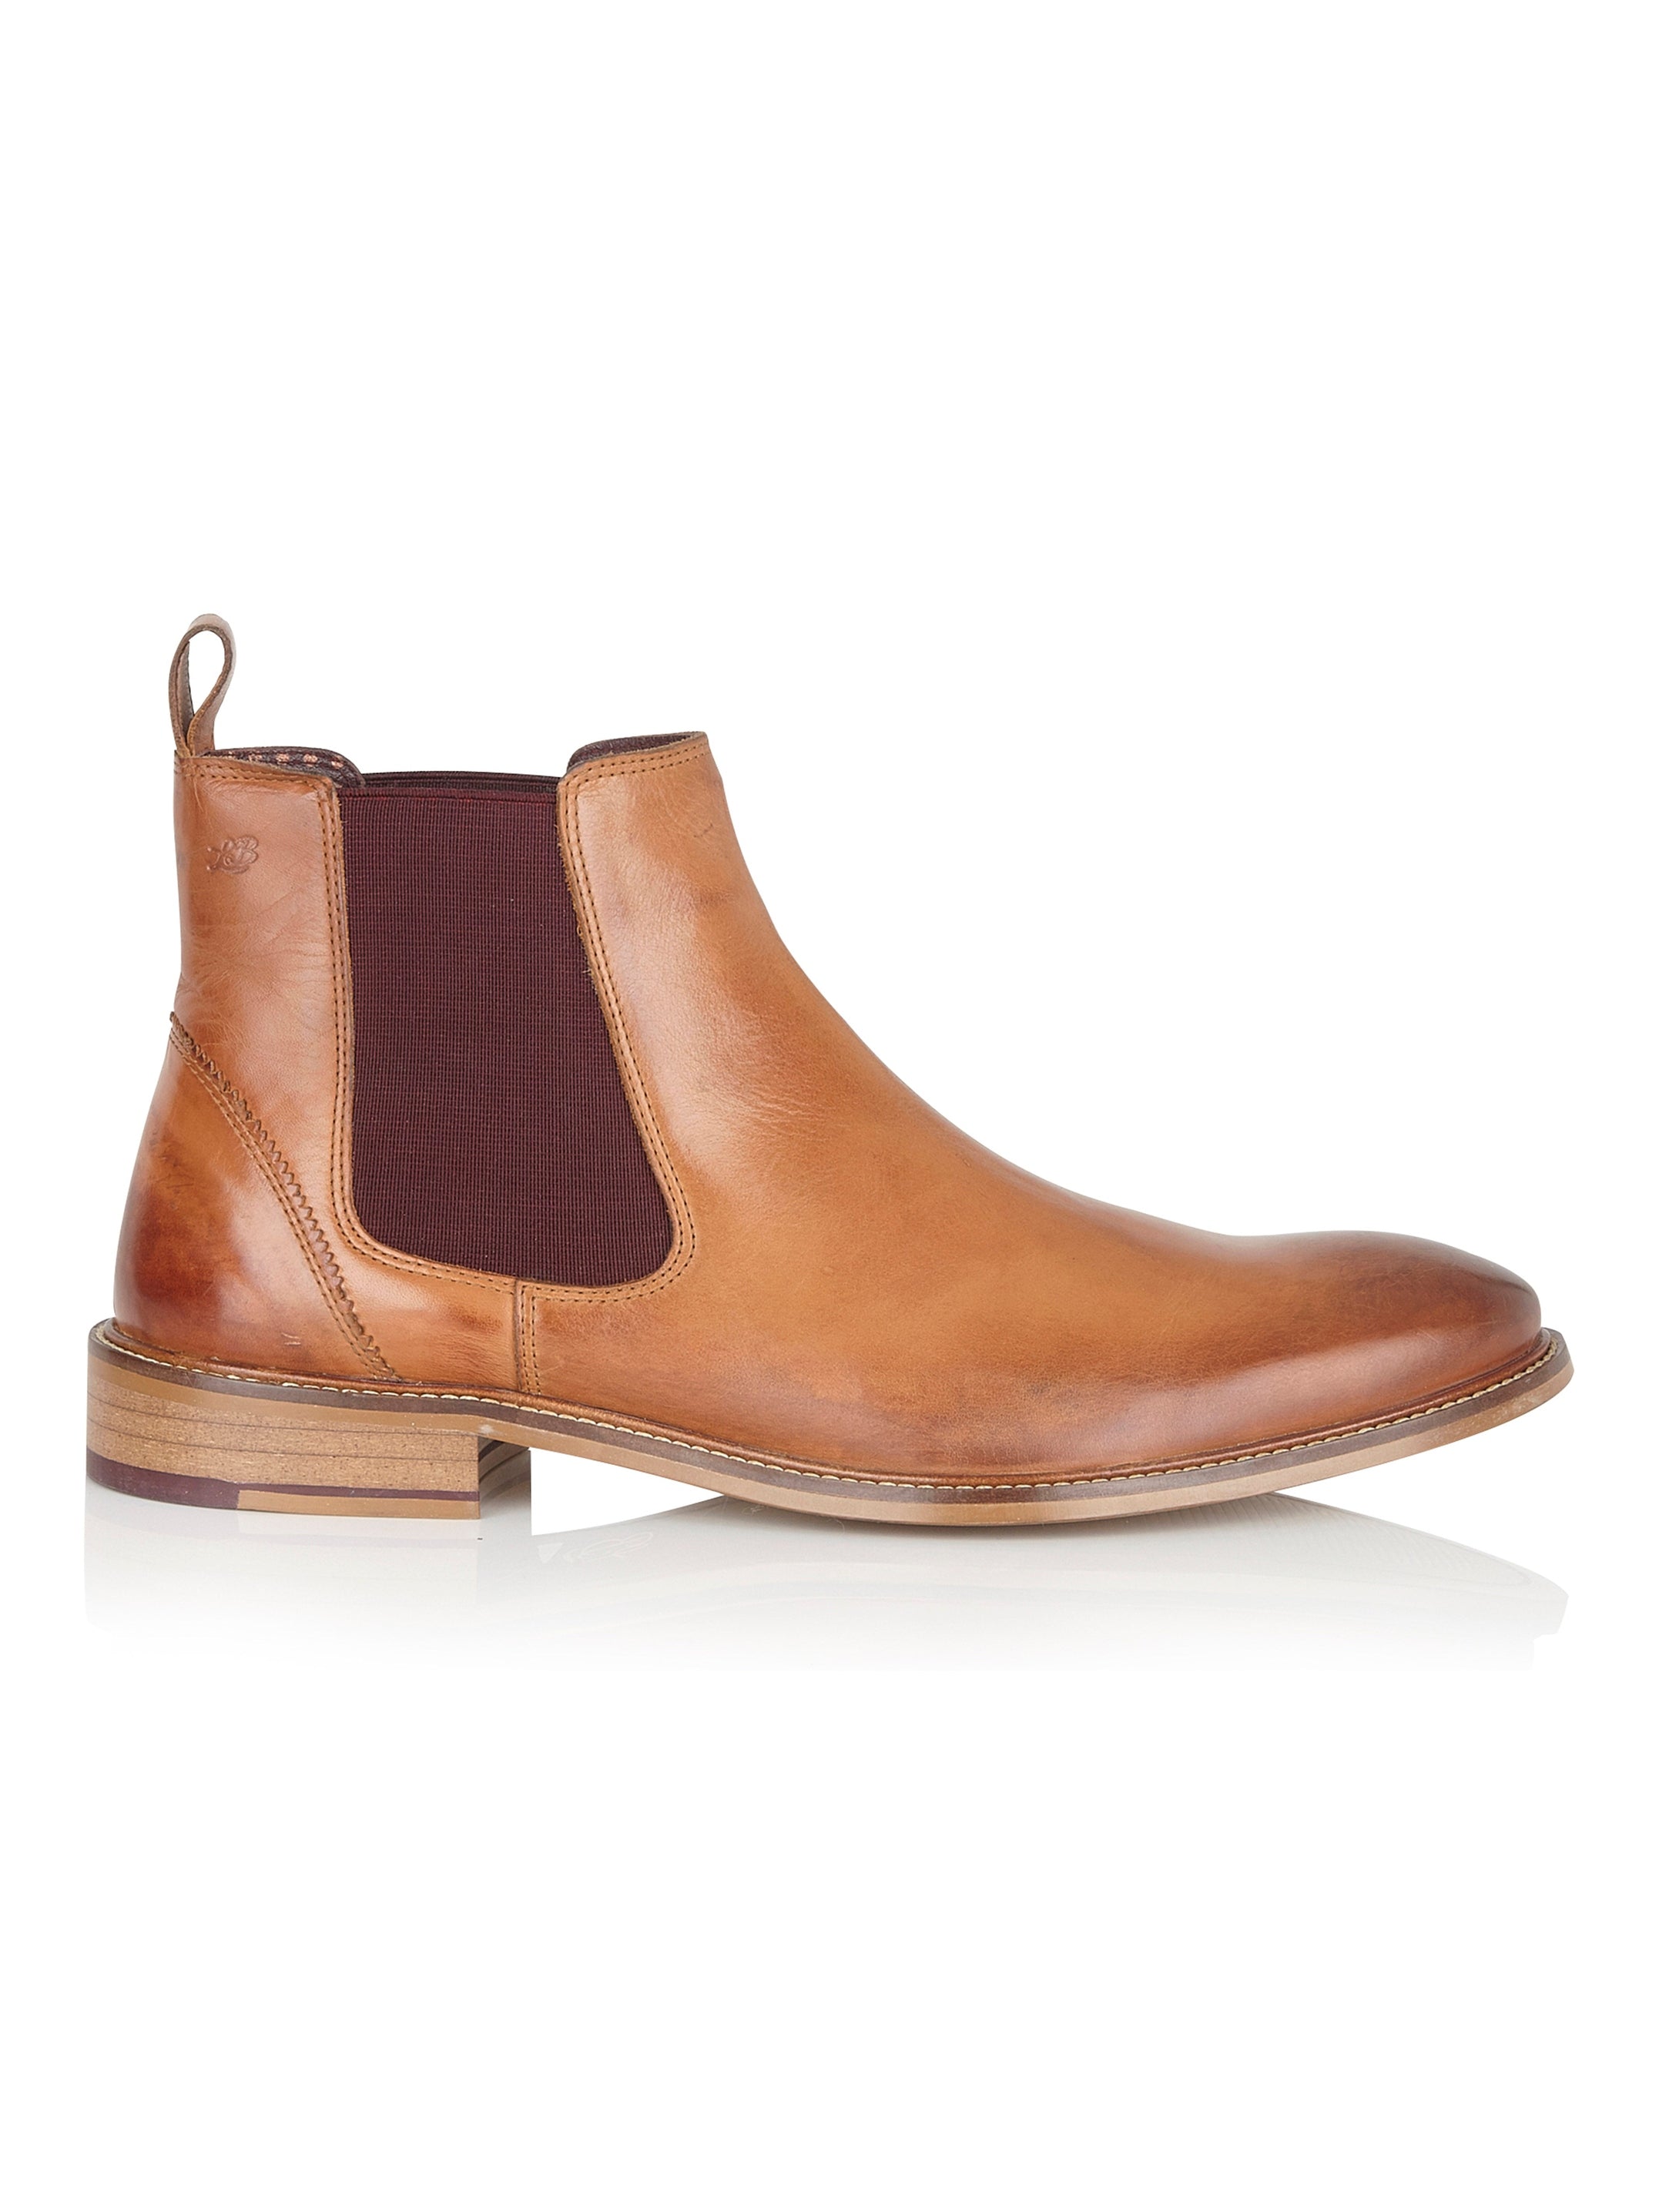 LEATHER CHELSEA BOOTS IN TAN